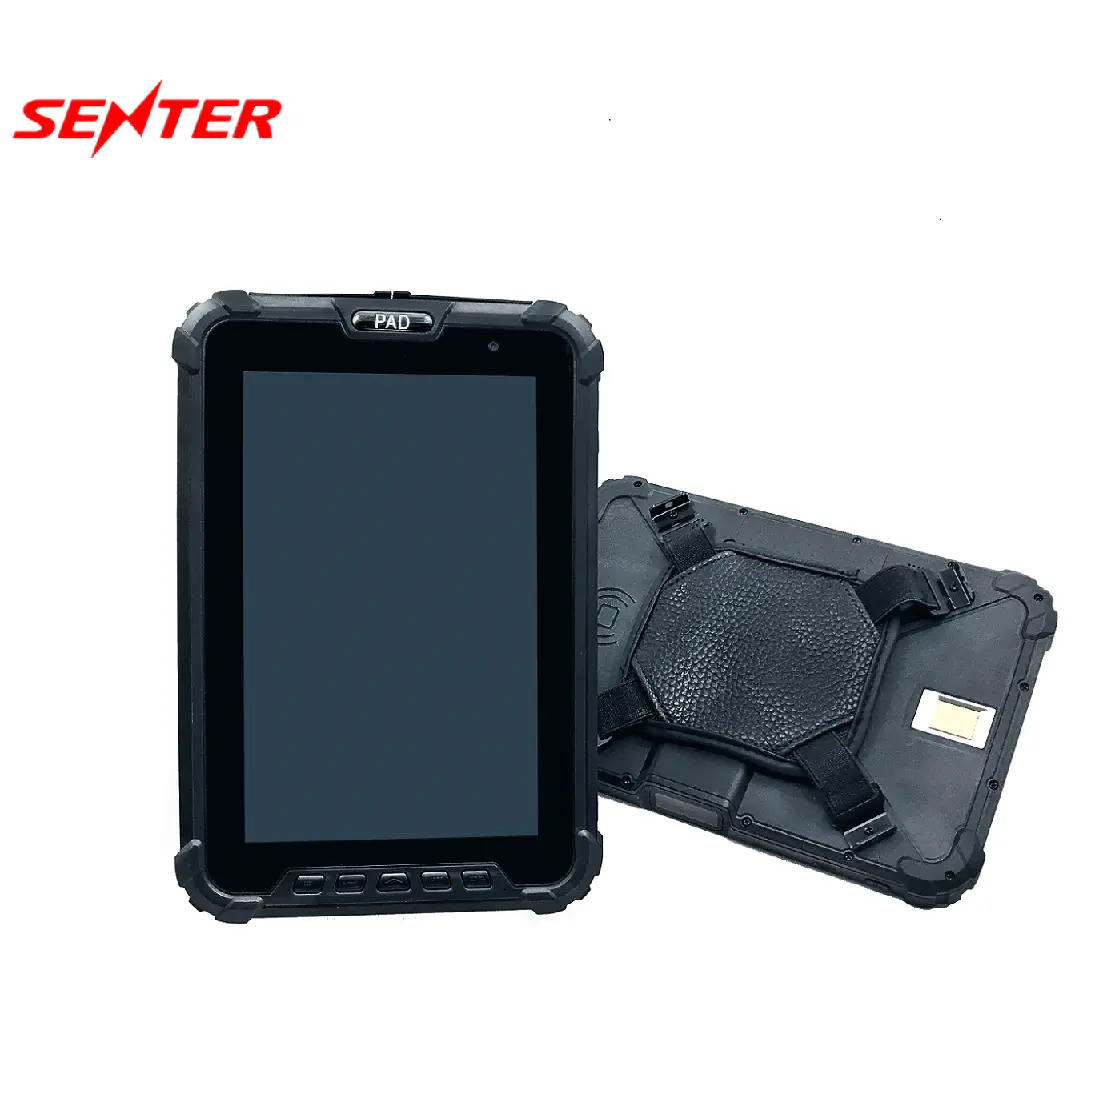 2.4GHz Long-Range UHF RFID active tag reader for big warehouse Android 9 octa core 4G WiFi BT GPS 8inch 4+64GB rugged tablet PC